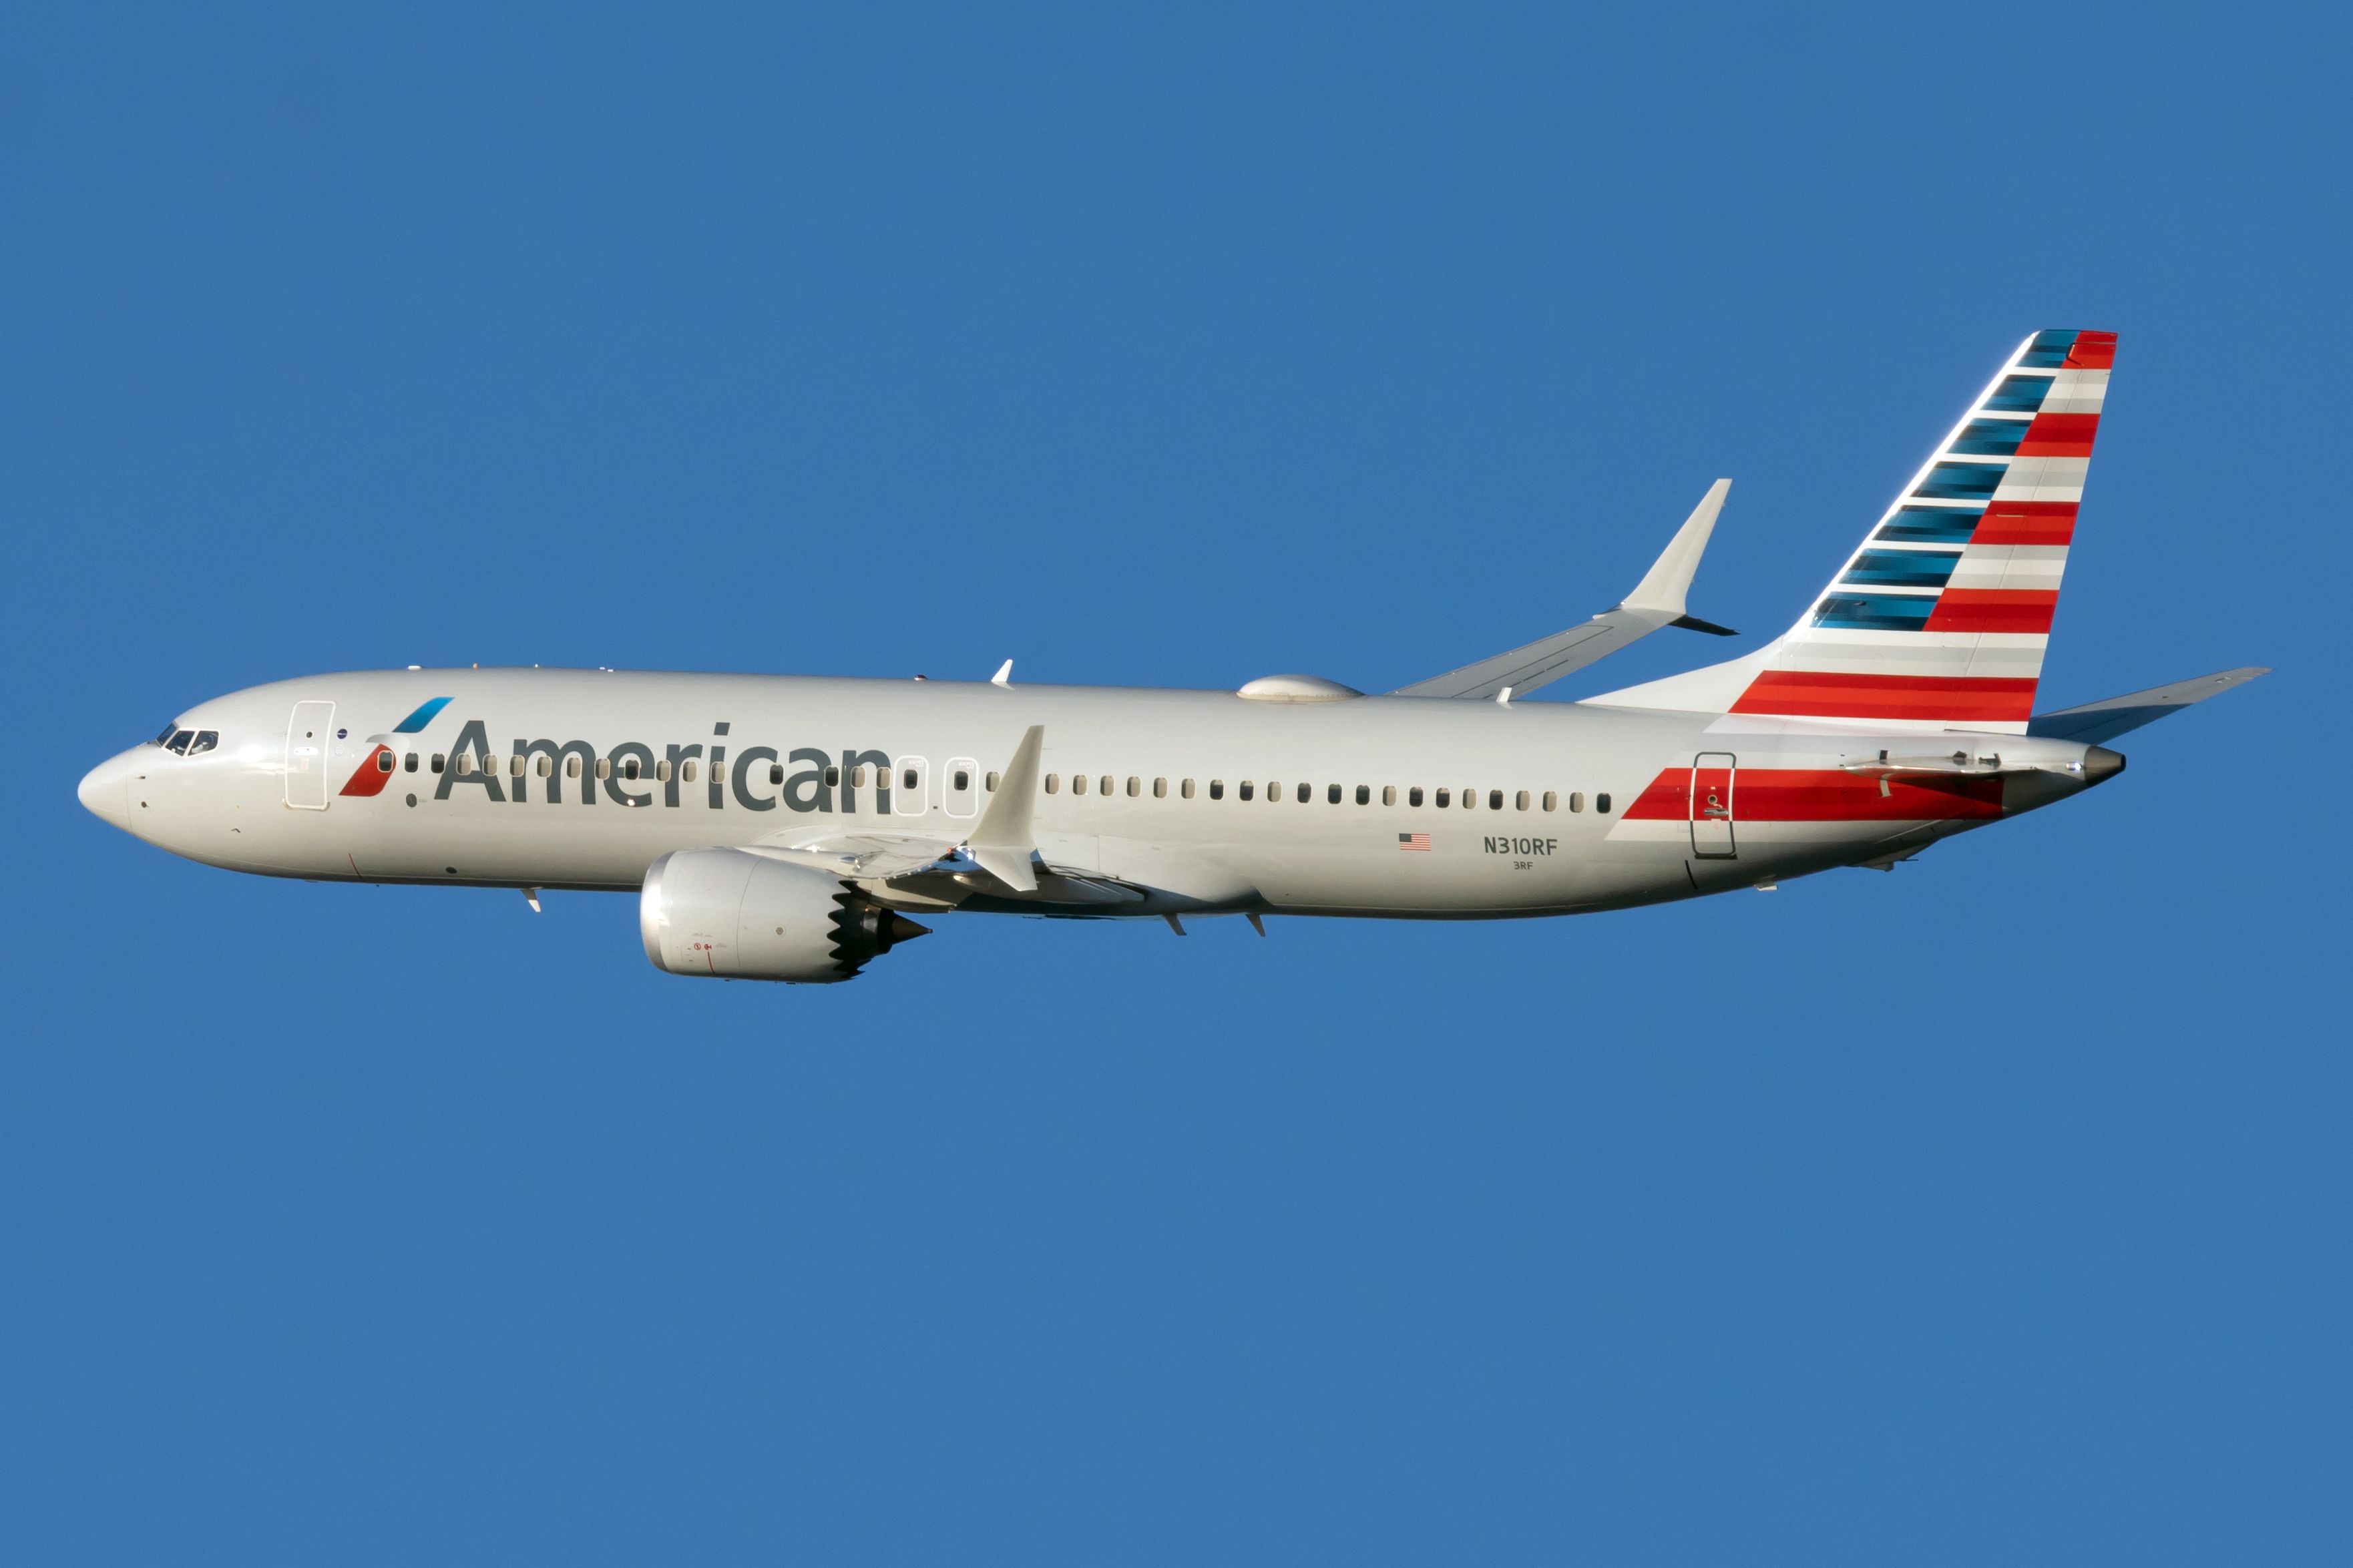 An American Airlines Boeing 737 MAX 8 flying in the sky.